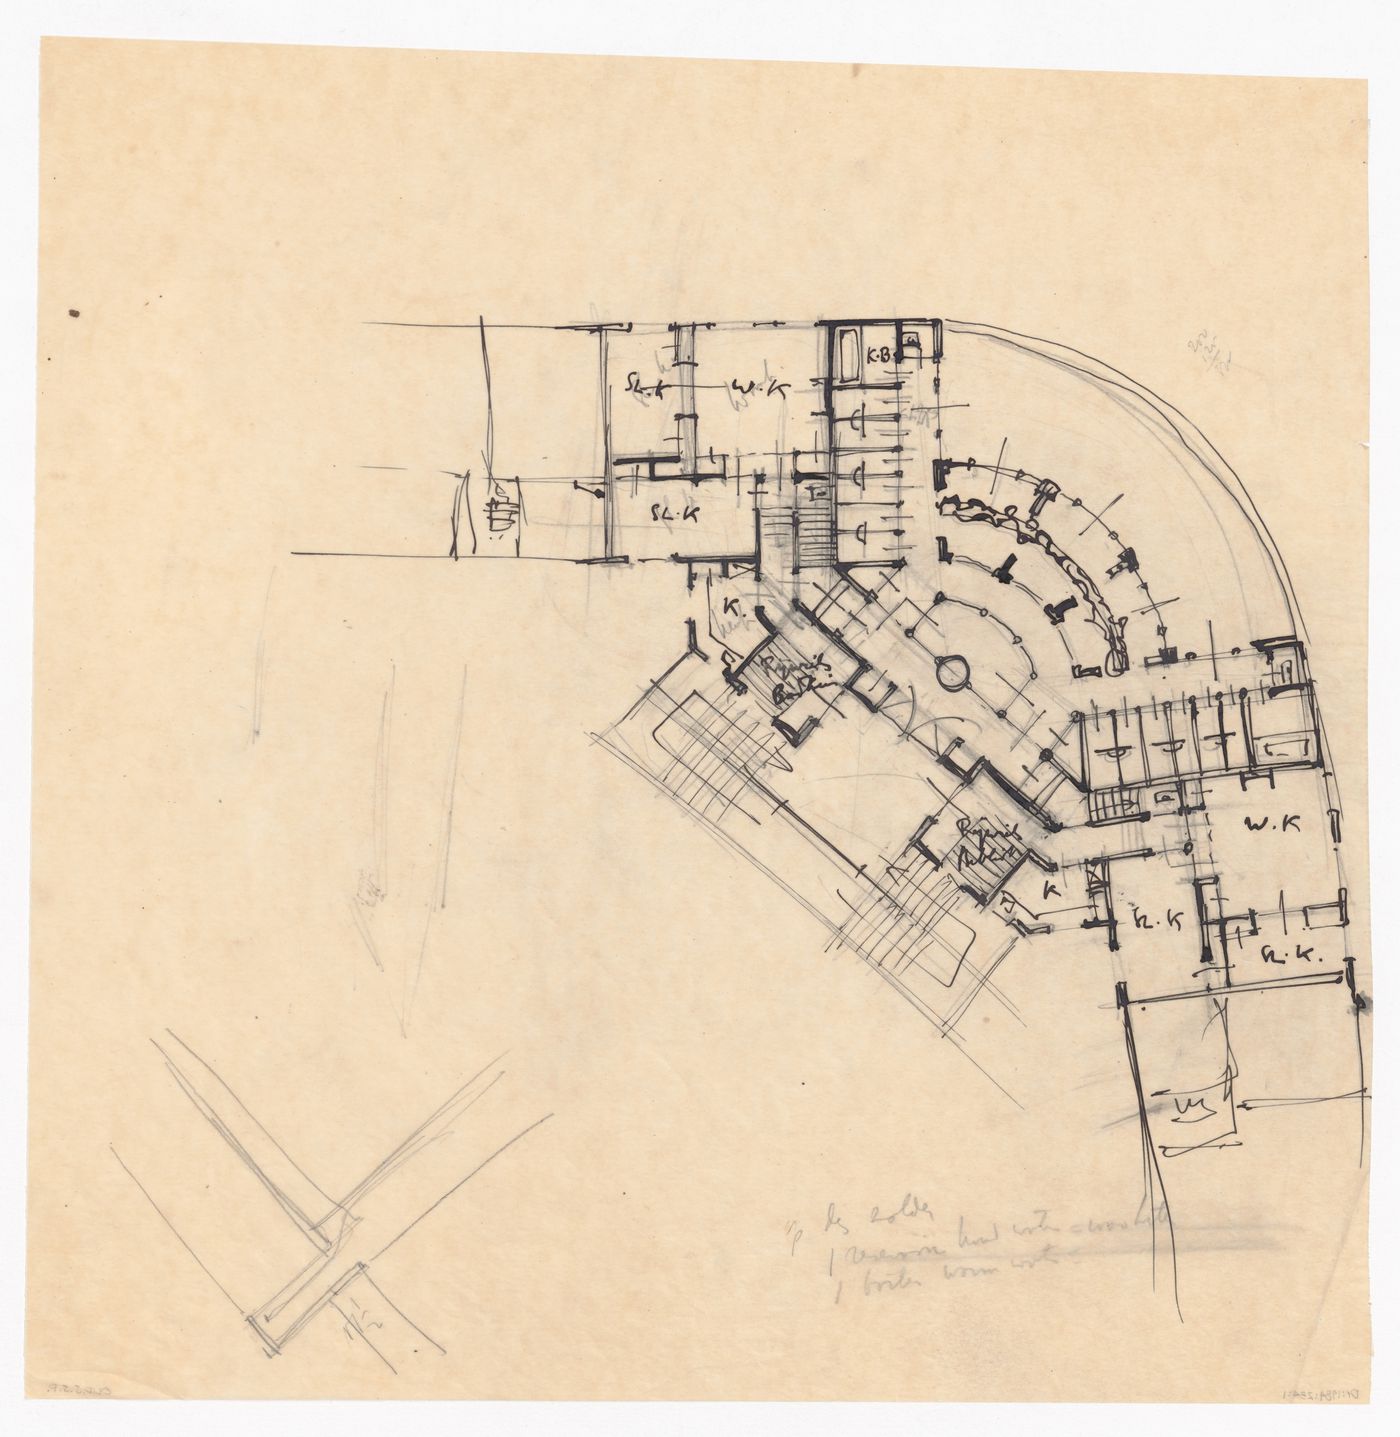 Sketch plan for a city hall for the reconstruction of the Hofplein (city centre), Rotterdam, Netherlands